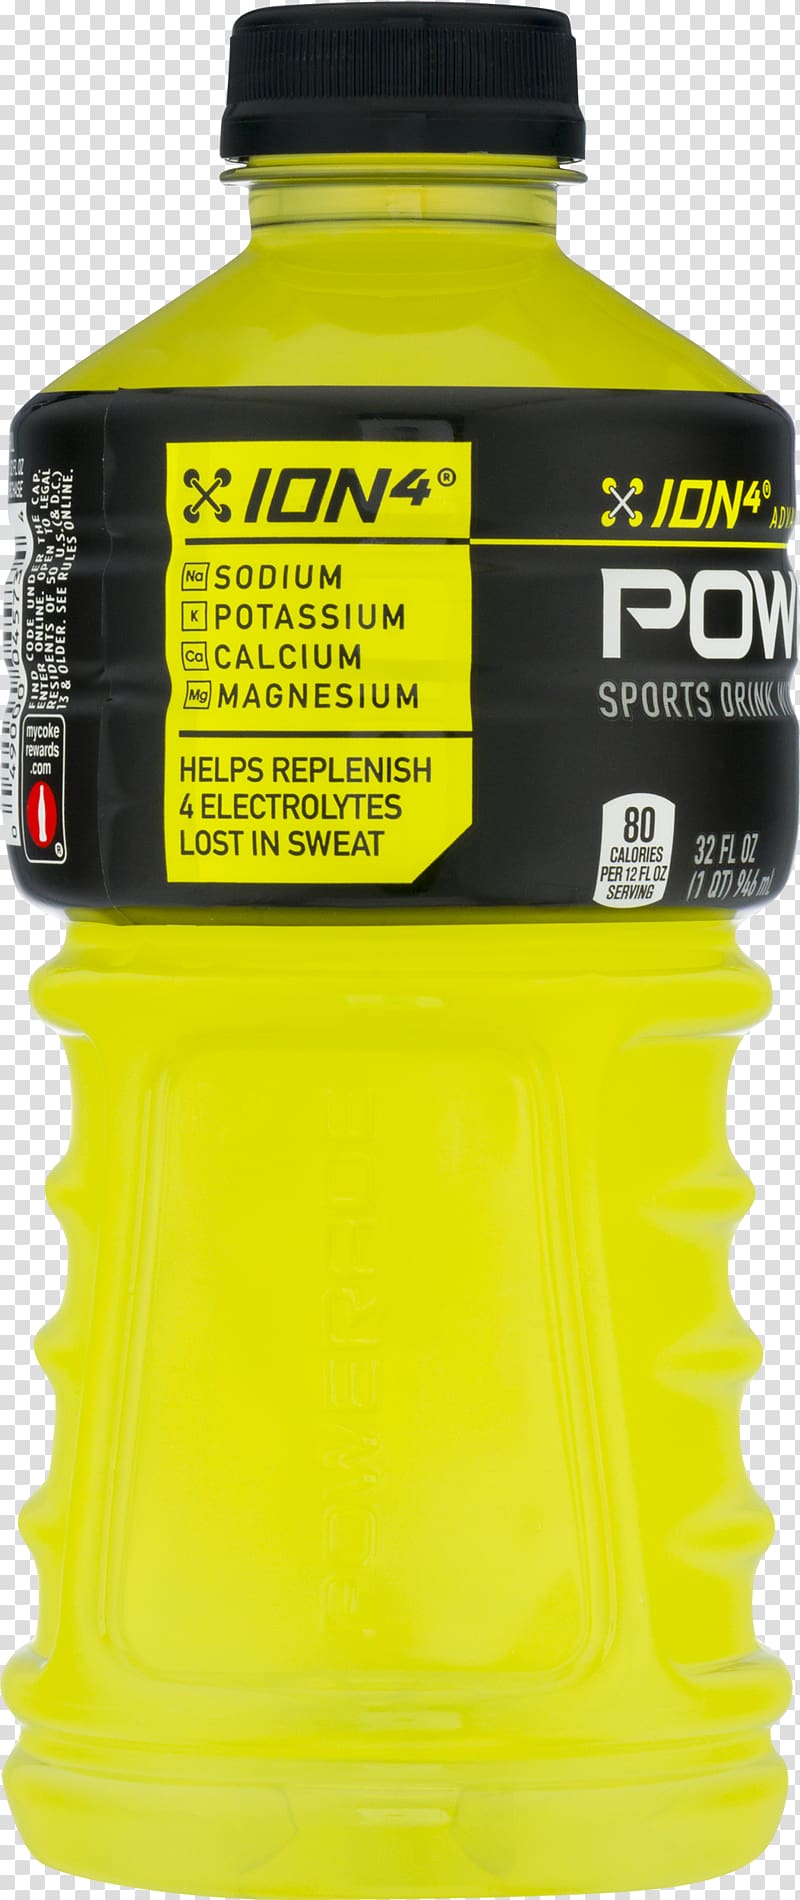 Sports & Energy Drinks Lemon-lime drink Powerade Zero Ion4 Sports drink Punch, punch transparent background PNG clipart